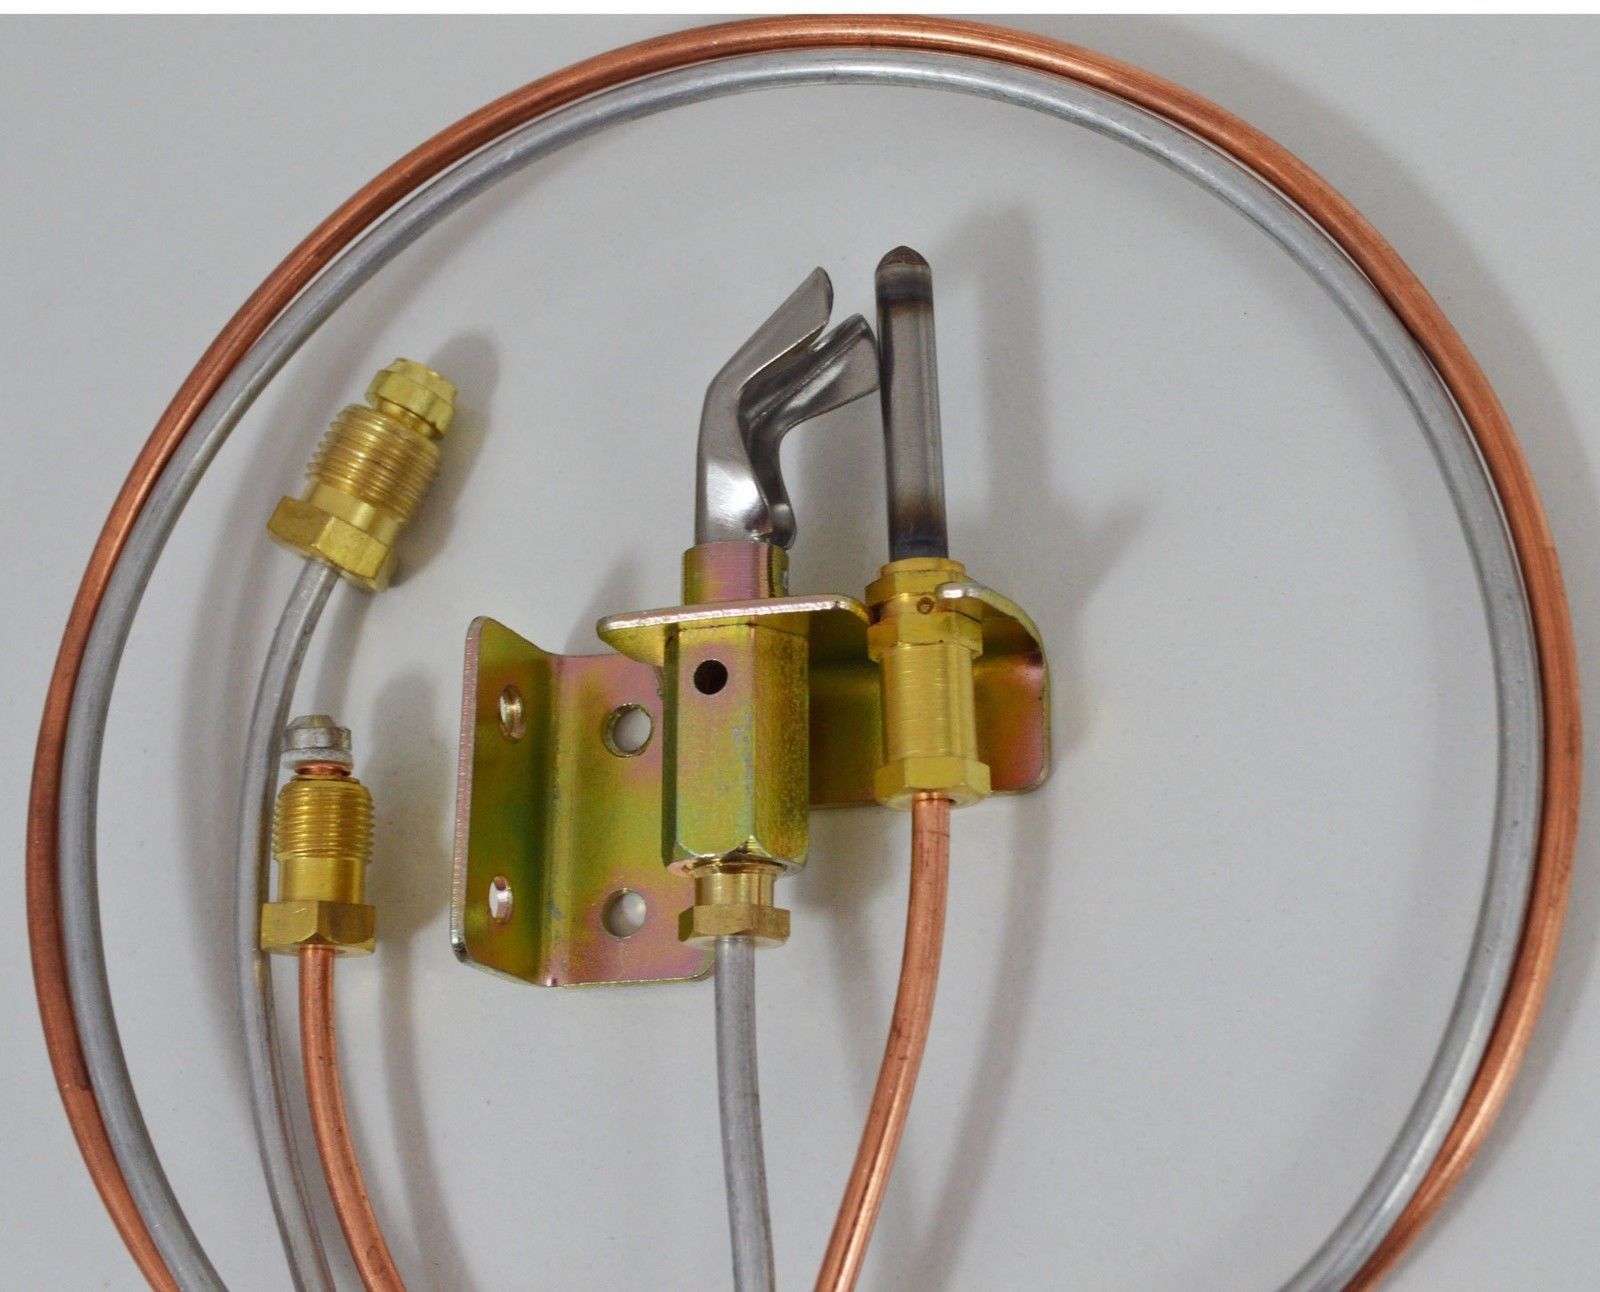 water-heater-pilot-assembly-includes-pilot-thermocouple-tubing